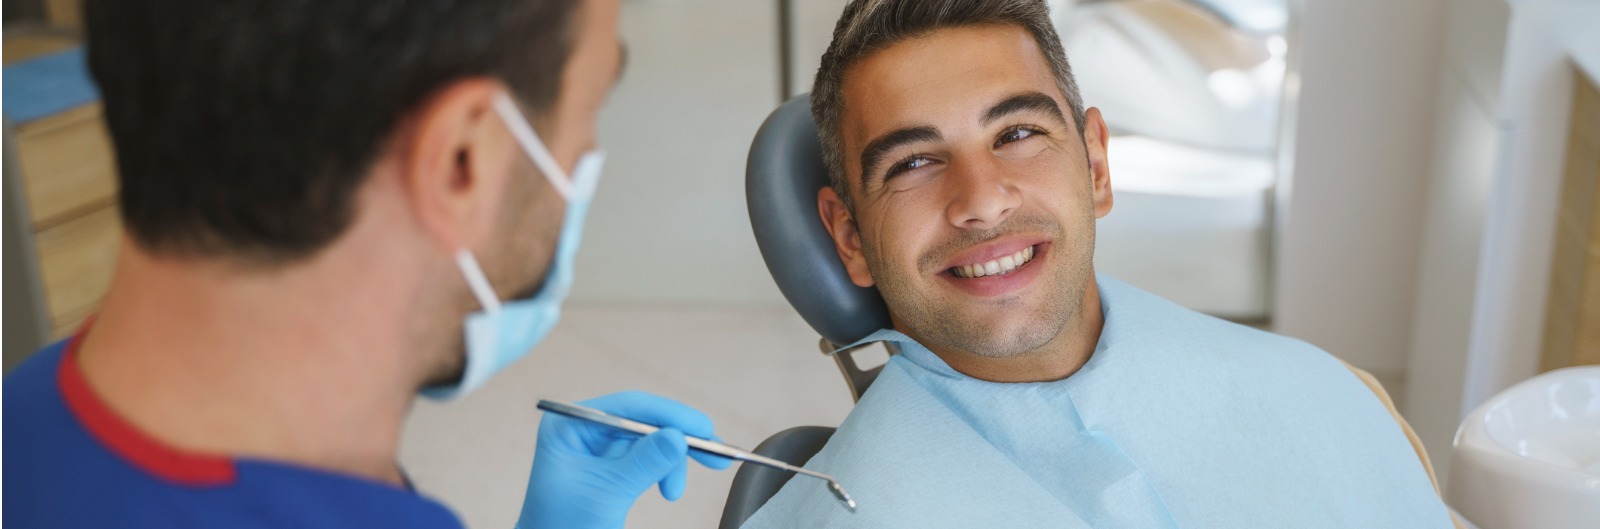 young-man-patient-having-dental-treatment-at-dentists-office-picture-id1600x529.jpg